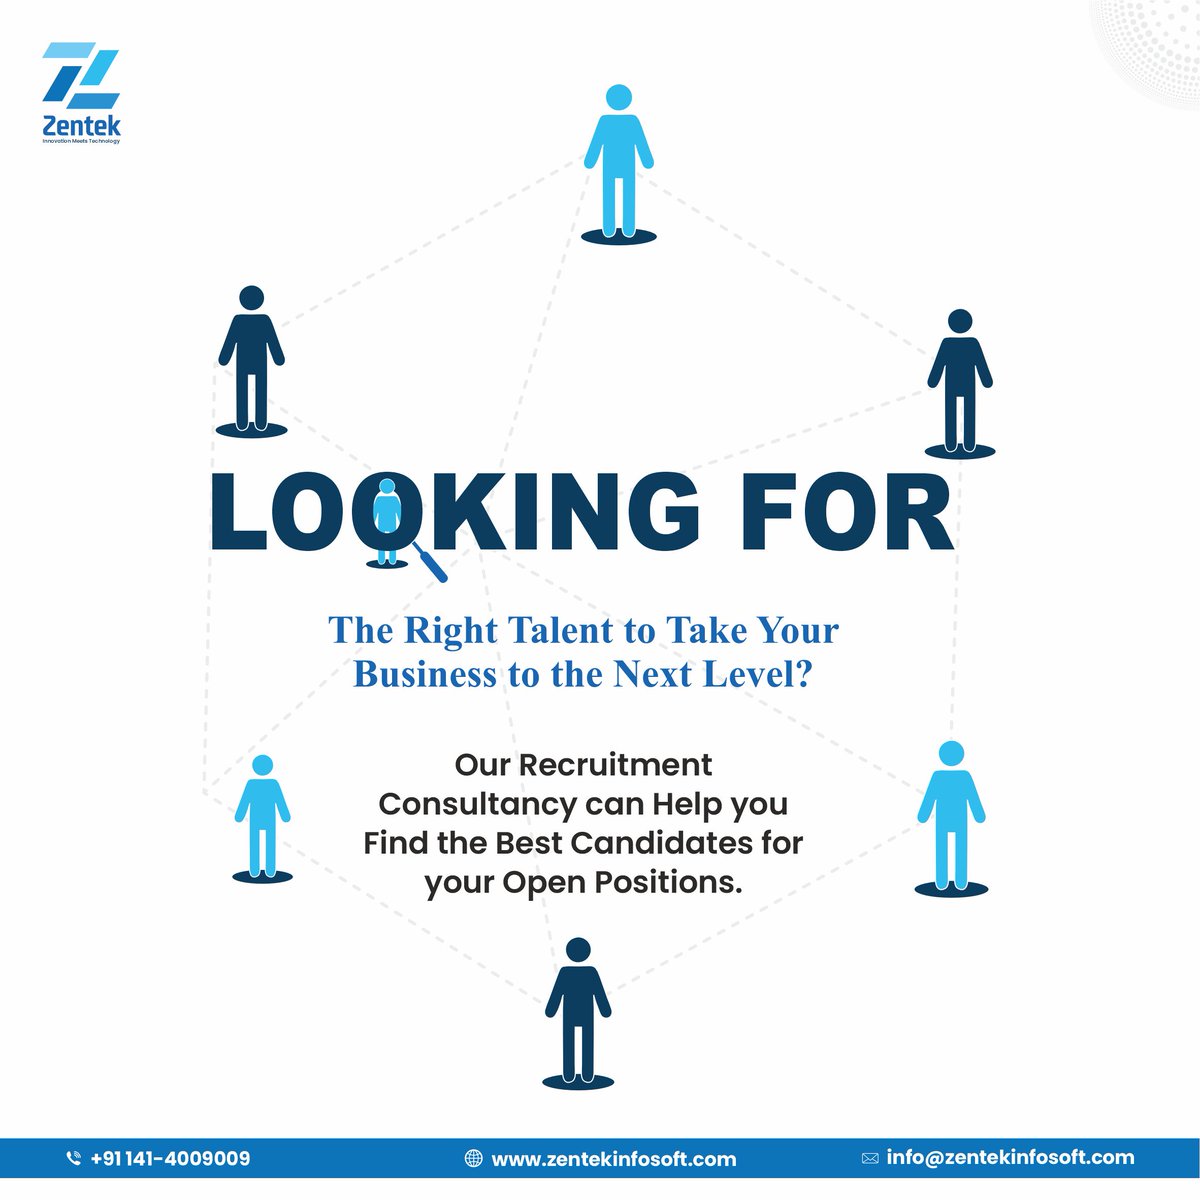 Are you looking for the right talent to take your business to the Next Level? Know how we are here to assist you with the best practices to attract the top talents!

#hiring #righttalent #business #toptalents #recruitment #itstaffing #staffingservices #staffingagency